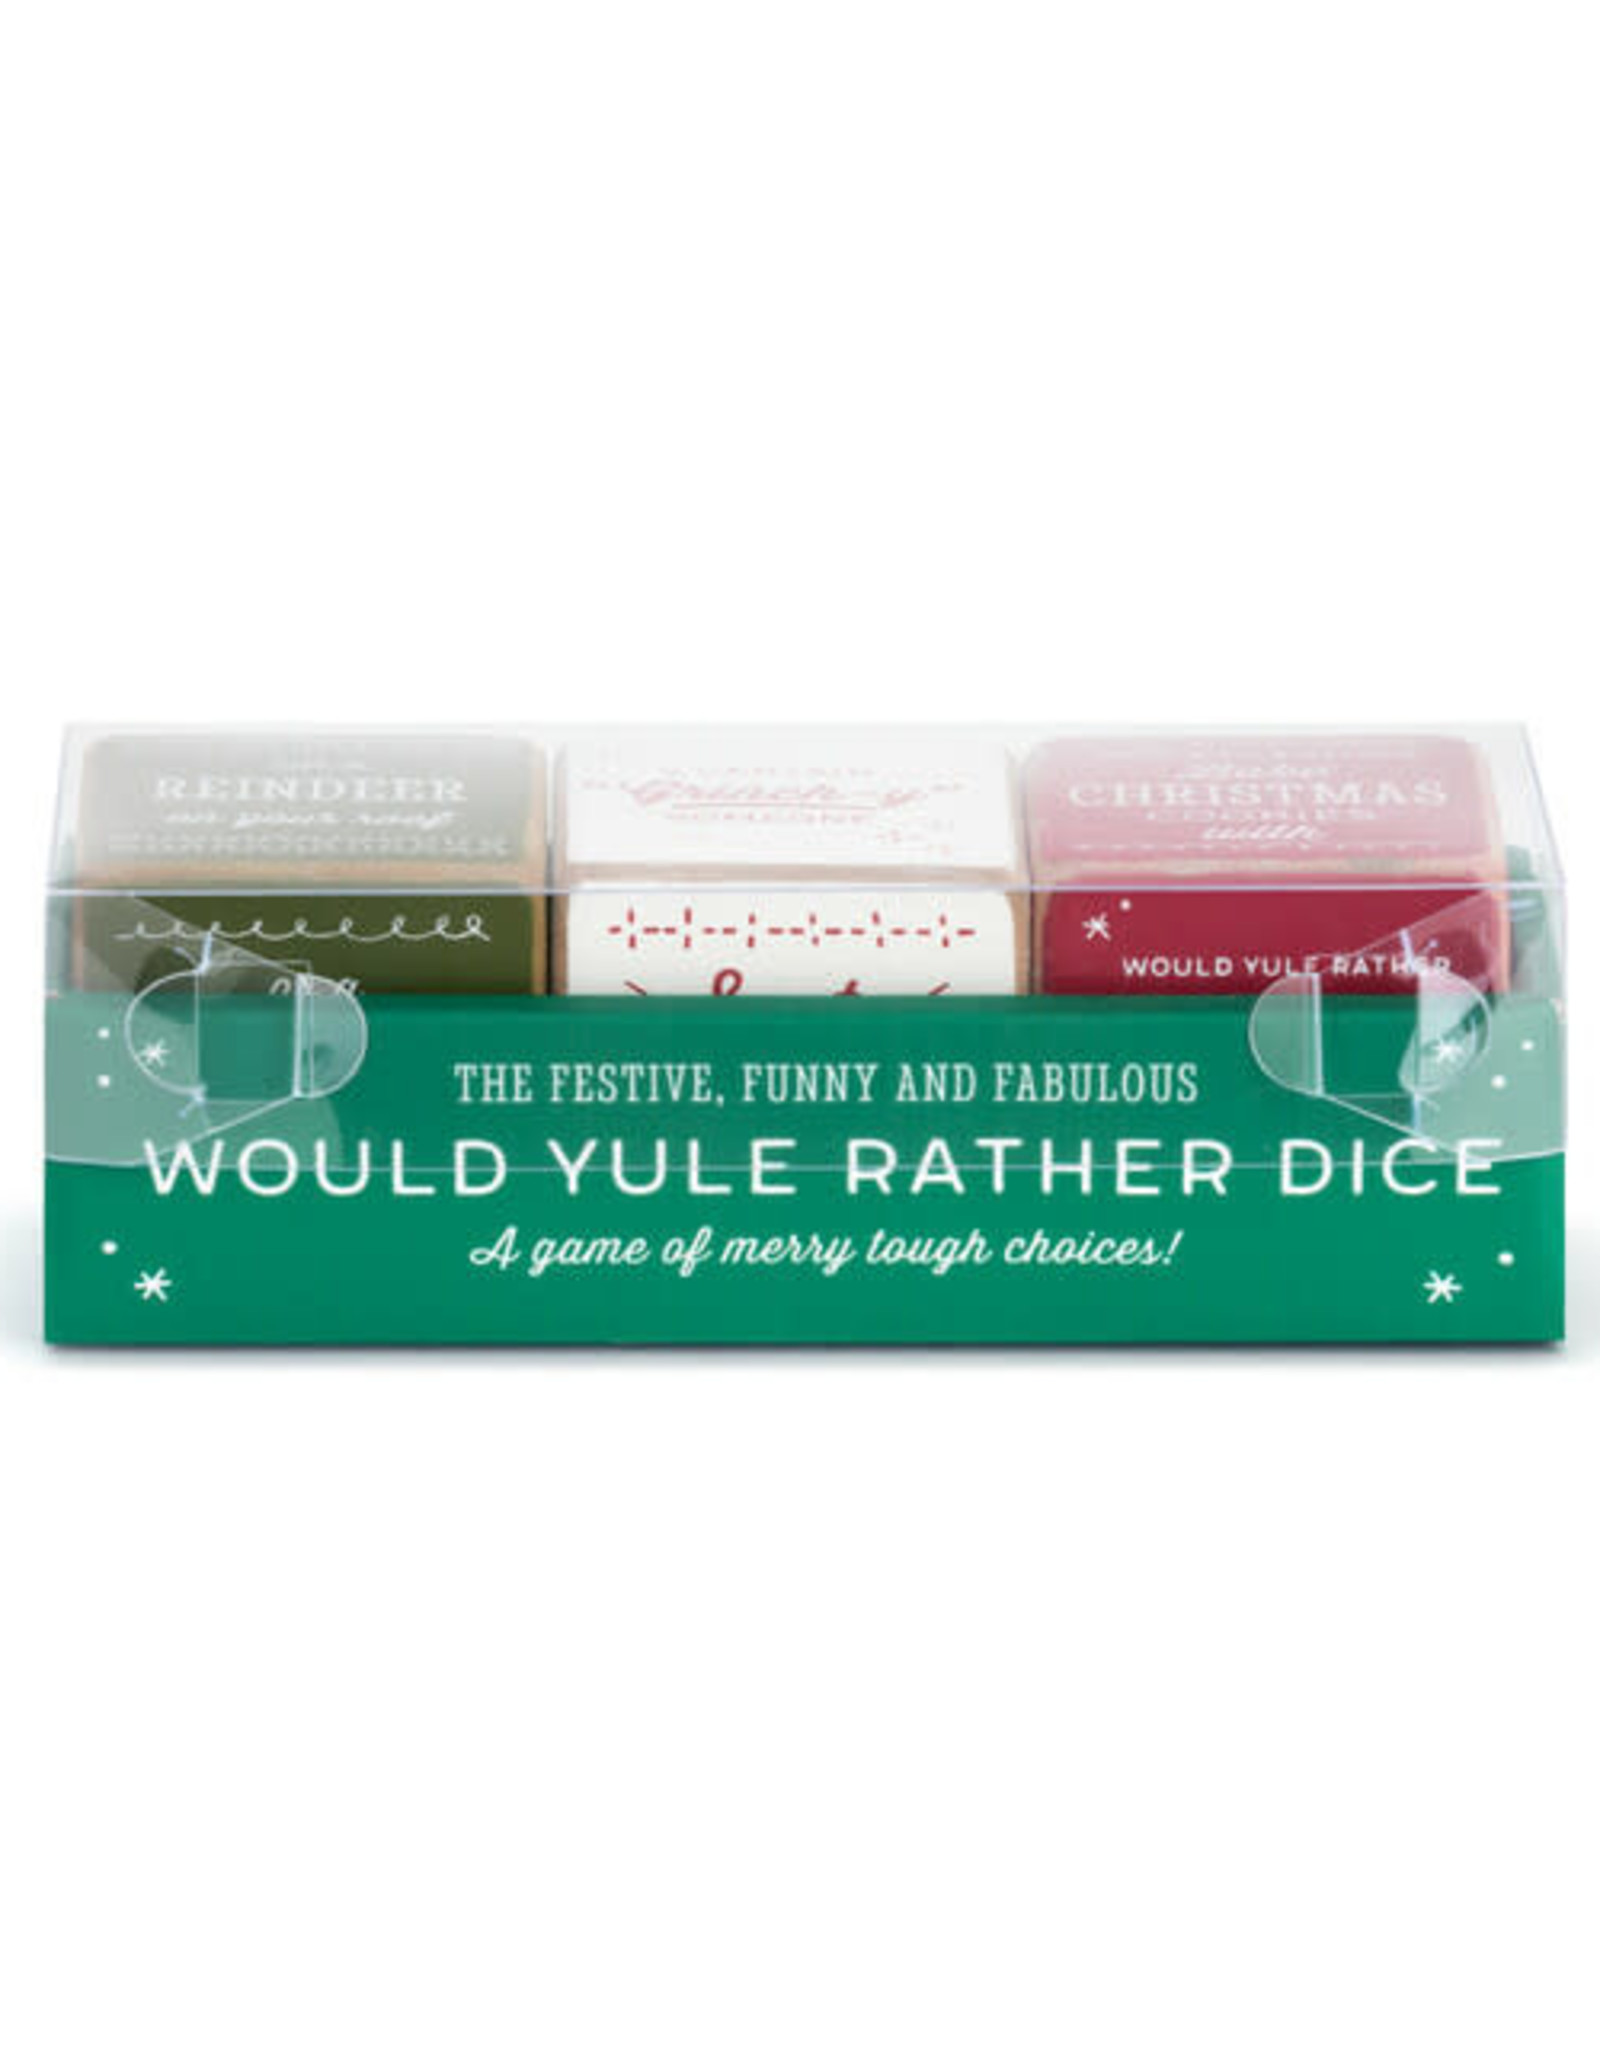 Demdaco WOULD YULE RATHER DICE SET